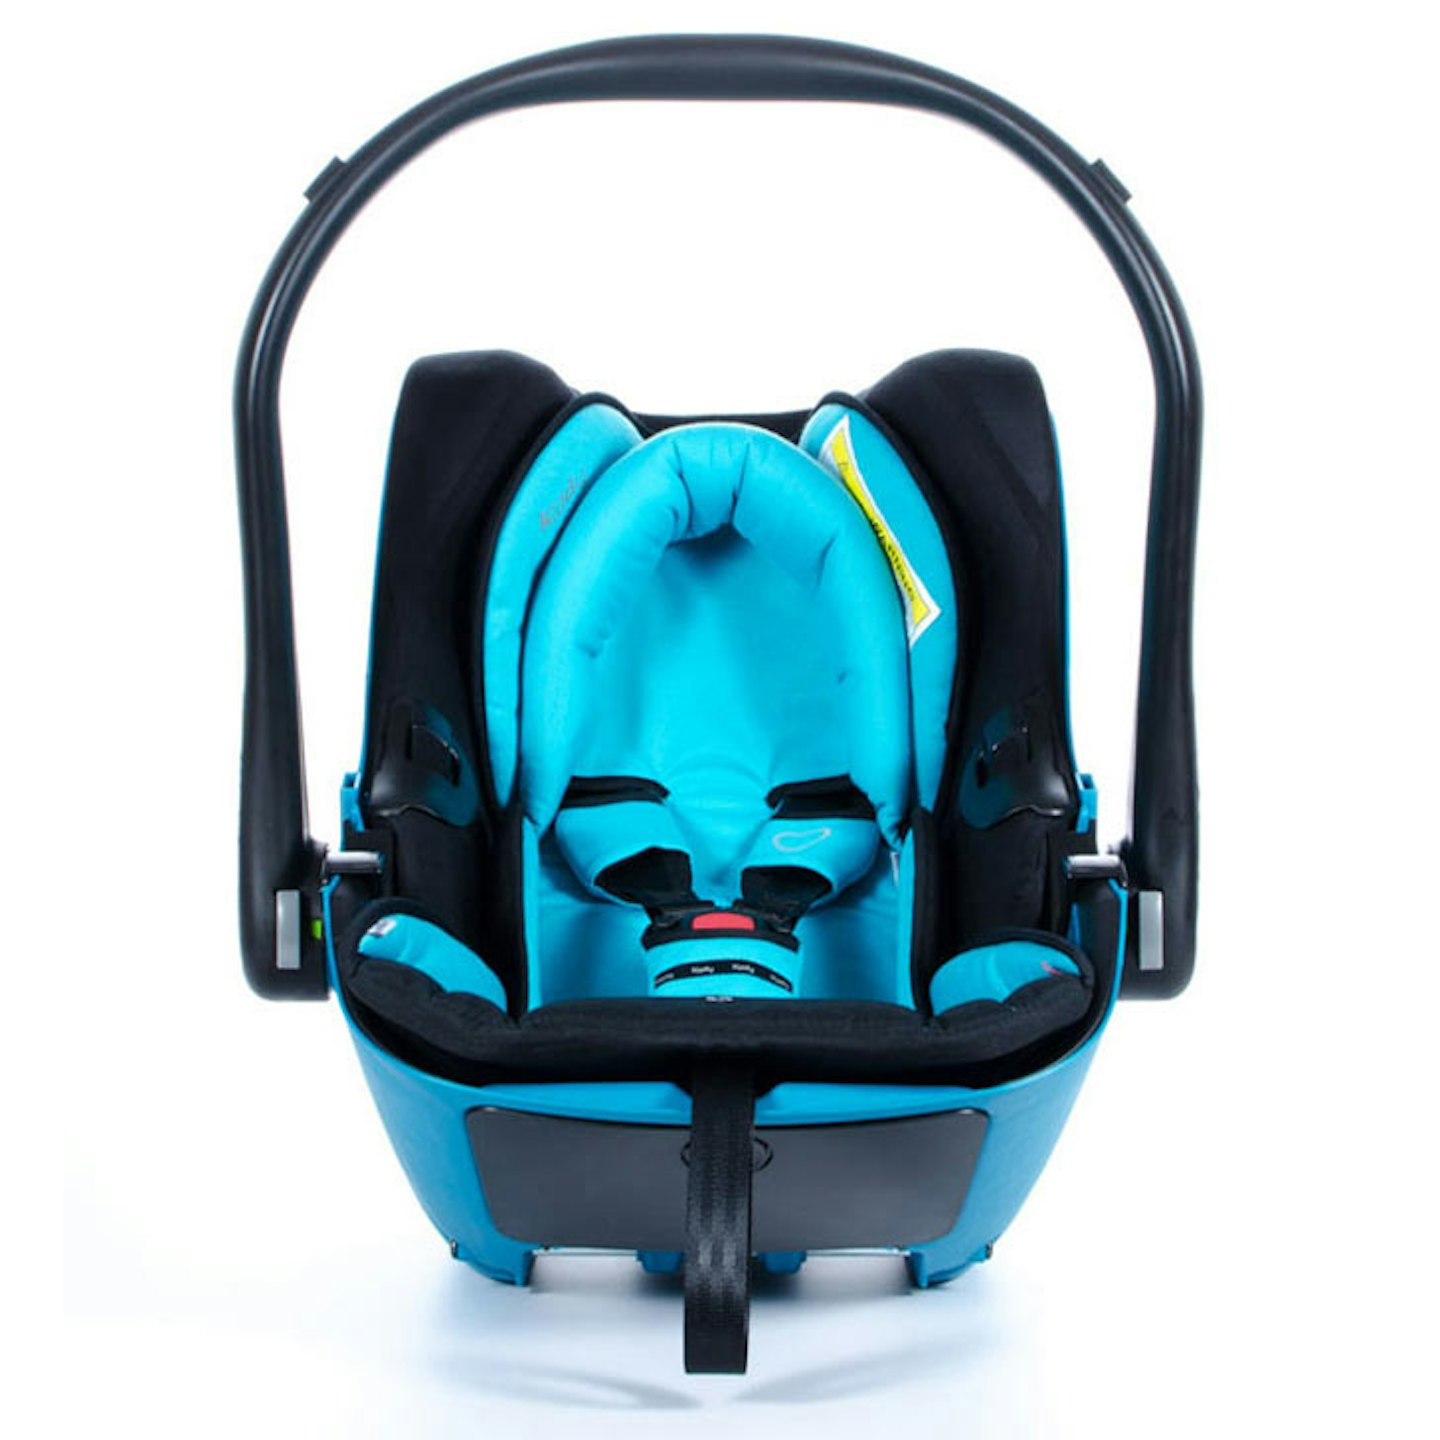 Kiddy Evolution Pro Car Seat review